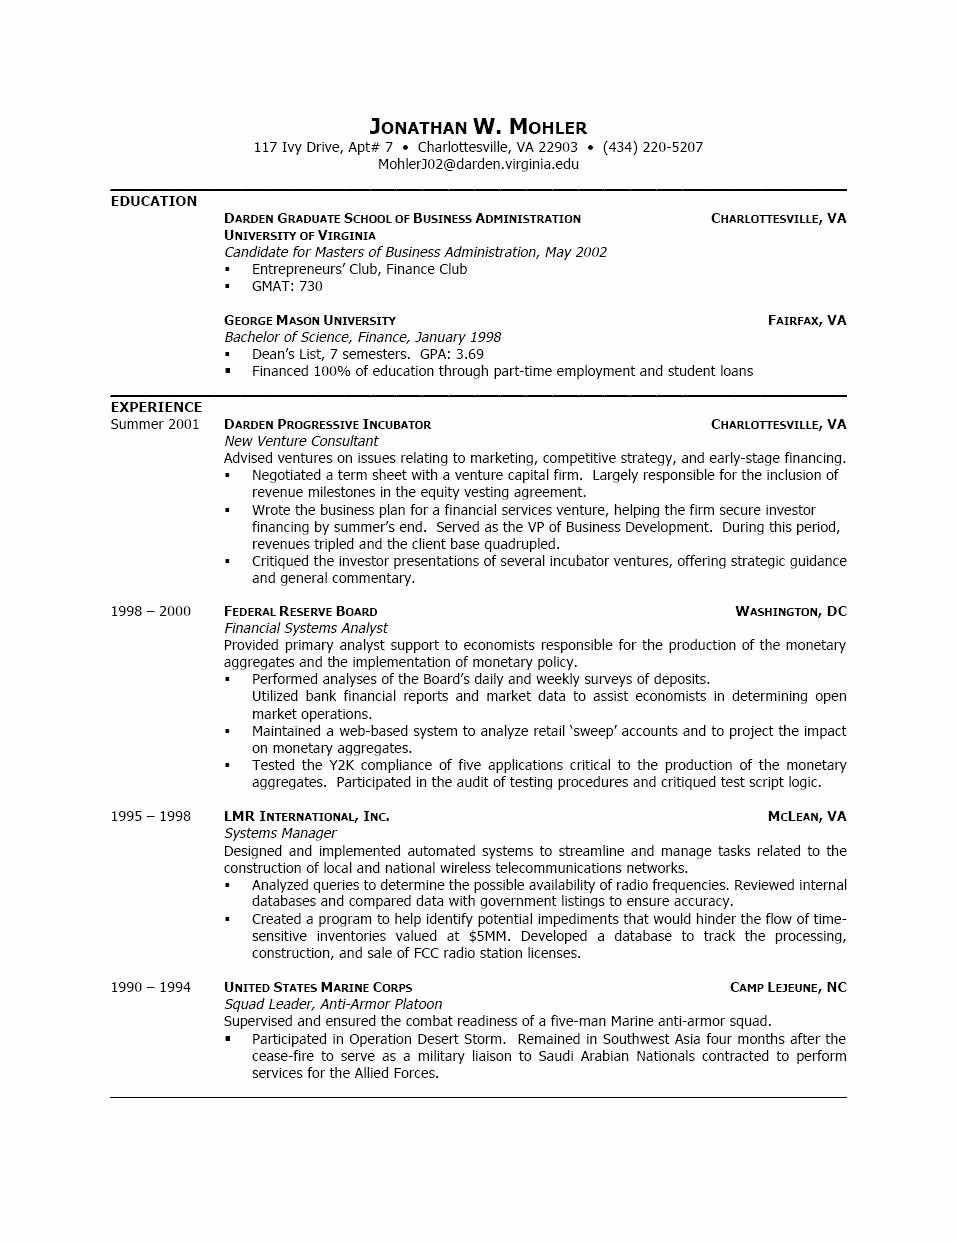 Resume Template On Word 2007 Elegant Resume Templates Word 2007 Gallery Professional Report